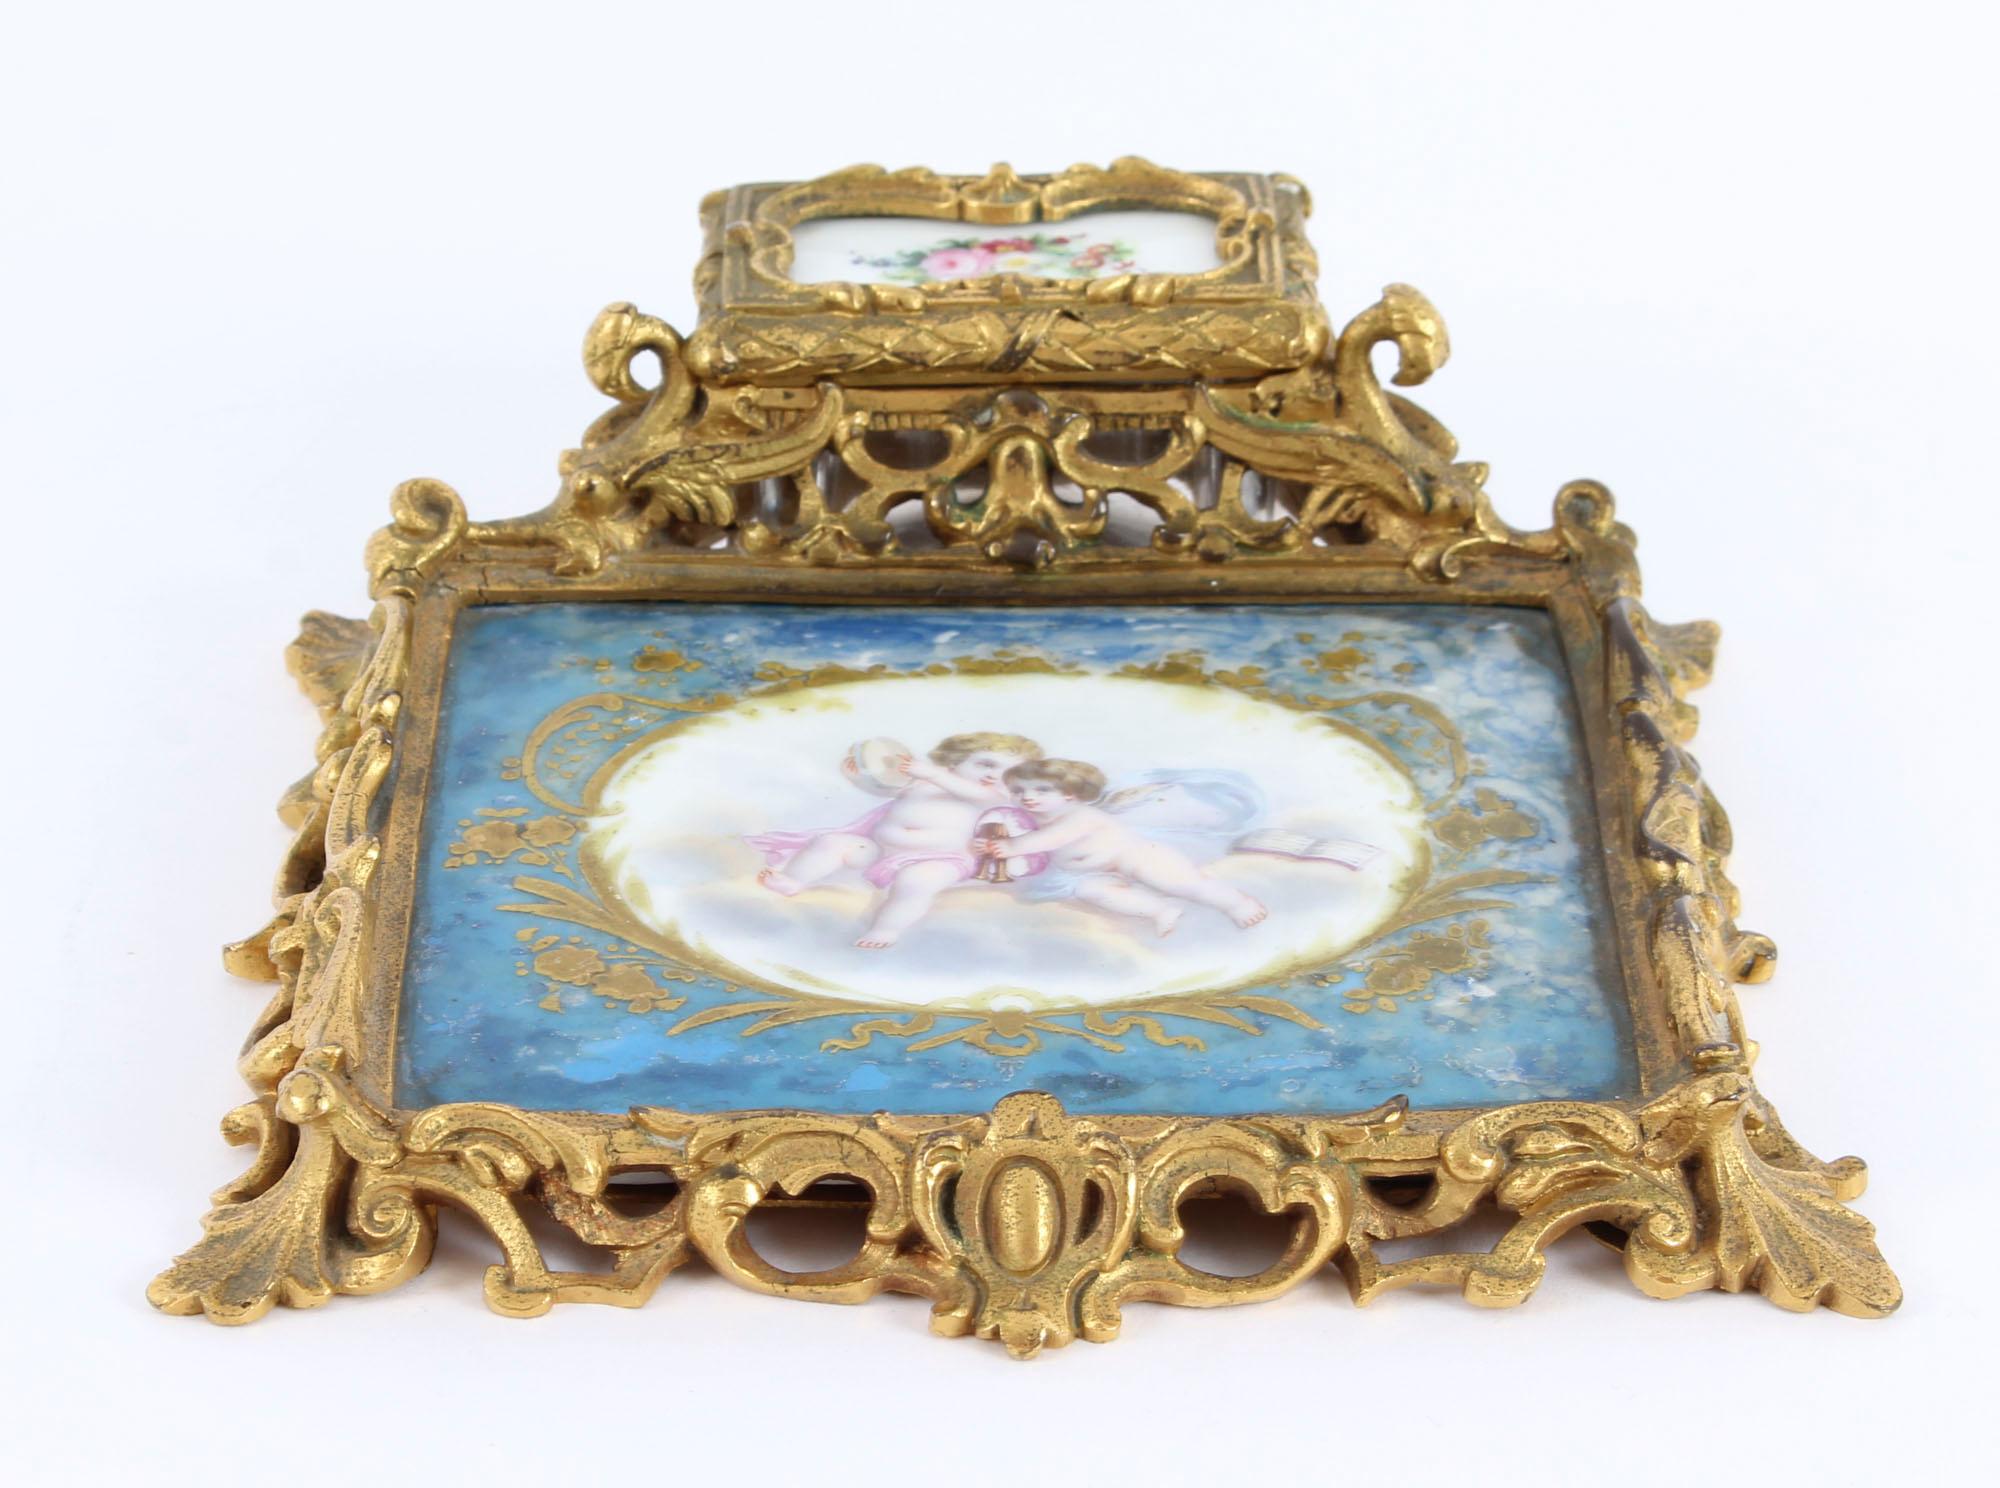 This is a wonderful antique French Louis Revival ormolu and Sevres porcelain inkstand, circa 1870 in date.

This stunning inkstand is mounted with an exquisite Bleu Celeste Sevres porcelain panel of rectangular shape, which has been masterfully